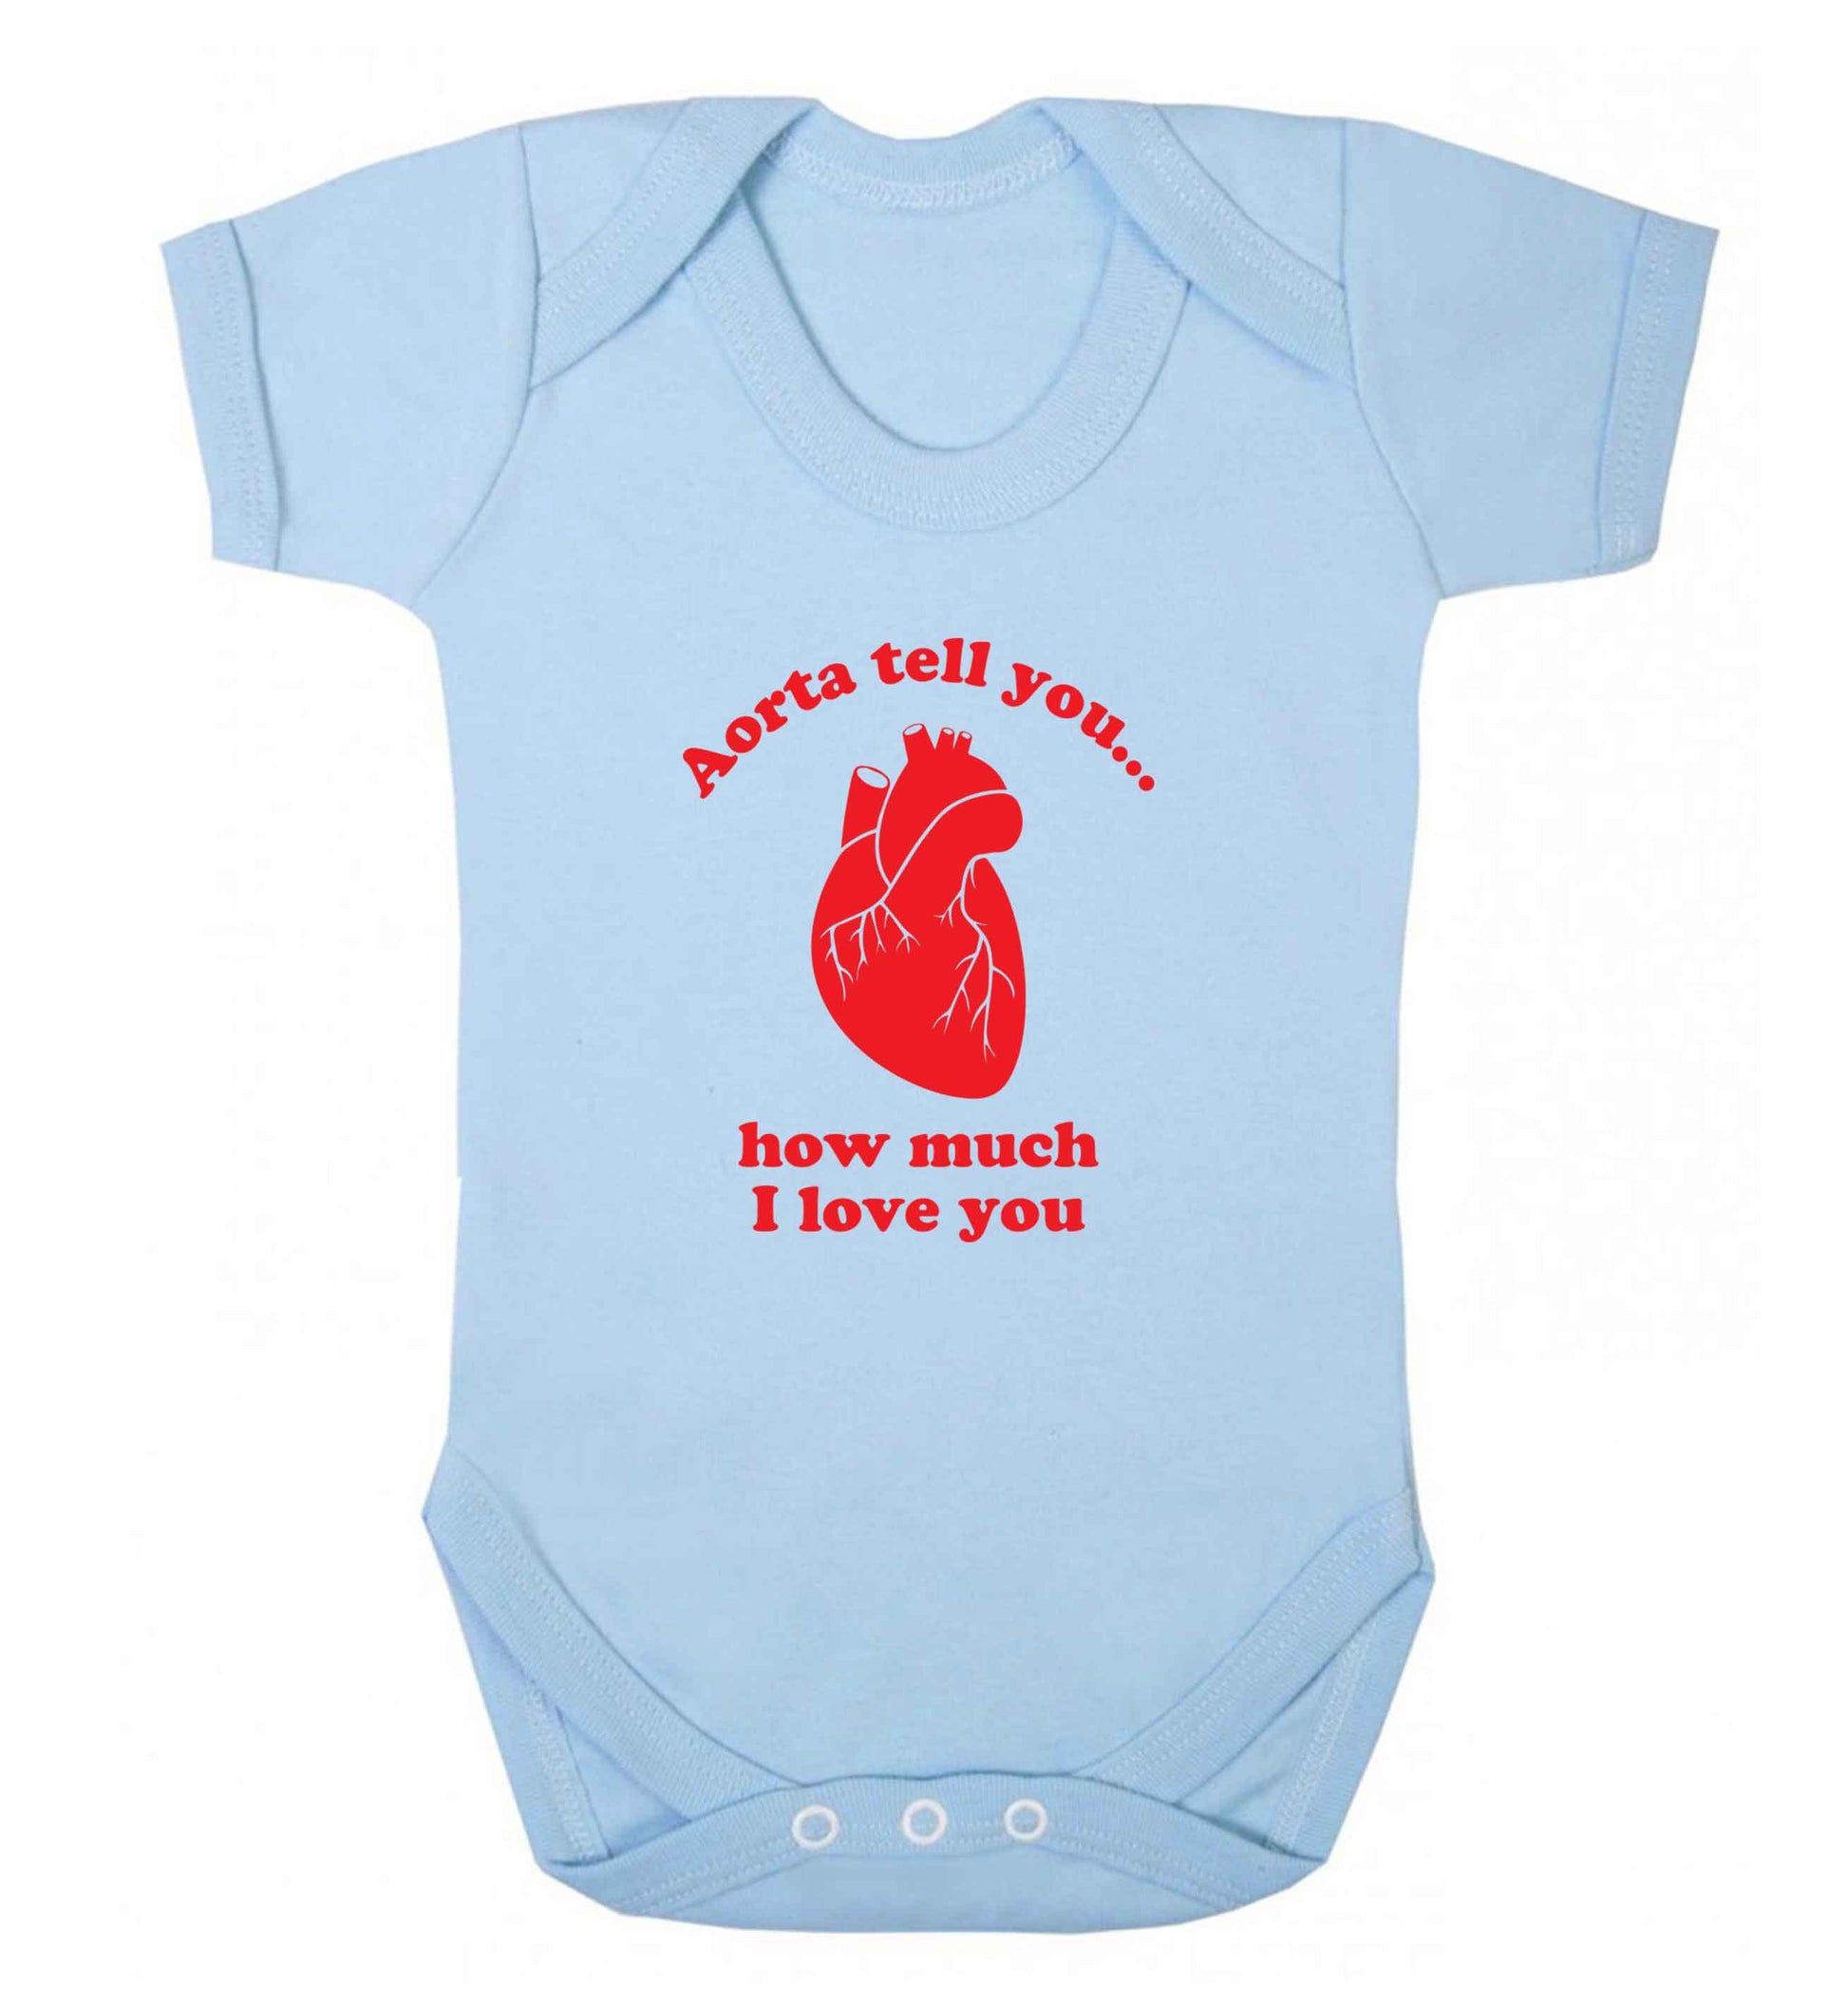 Aorta tell you how much I love you baby vest pale blue 18-24 months